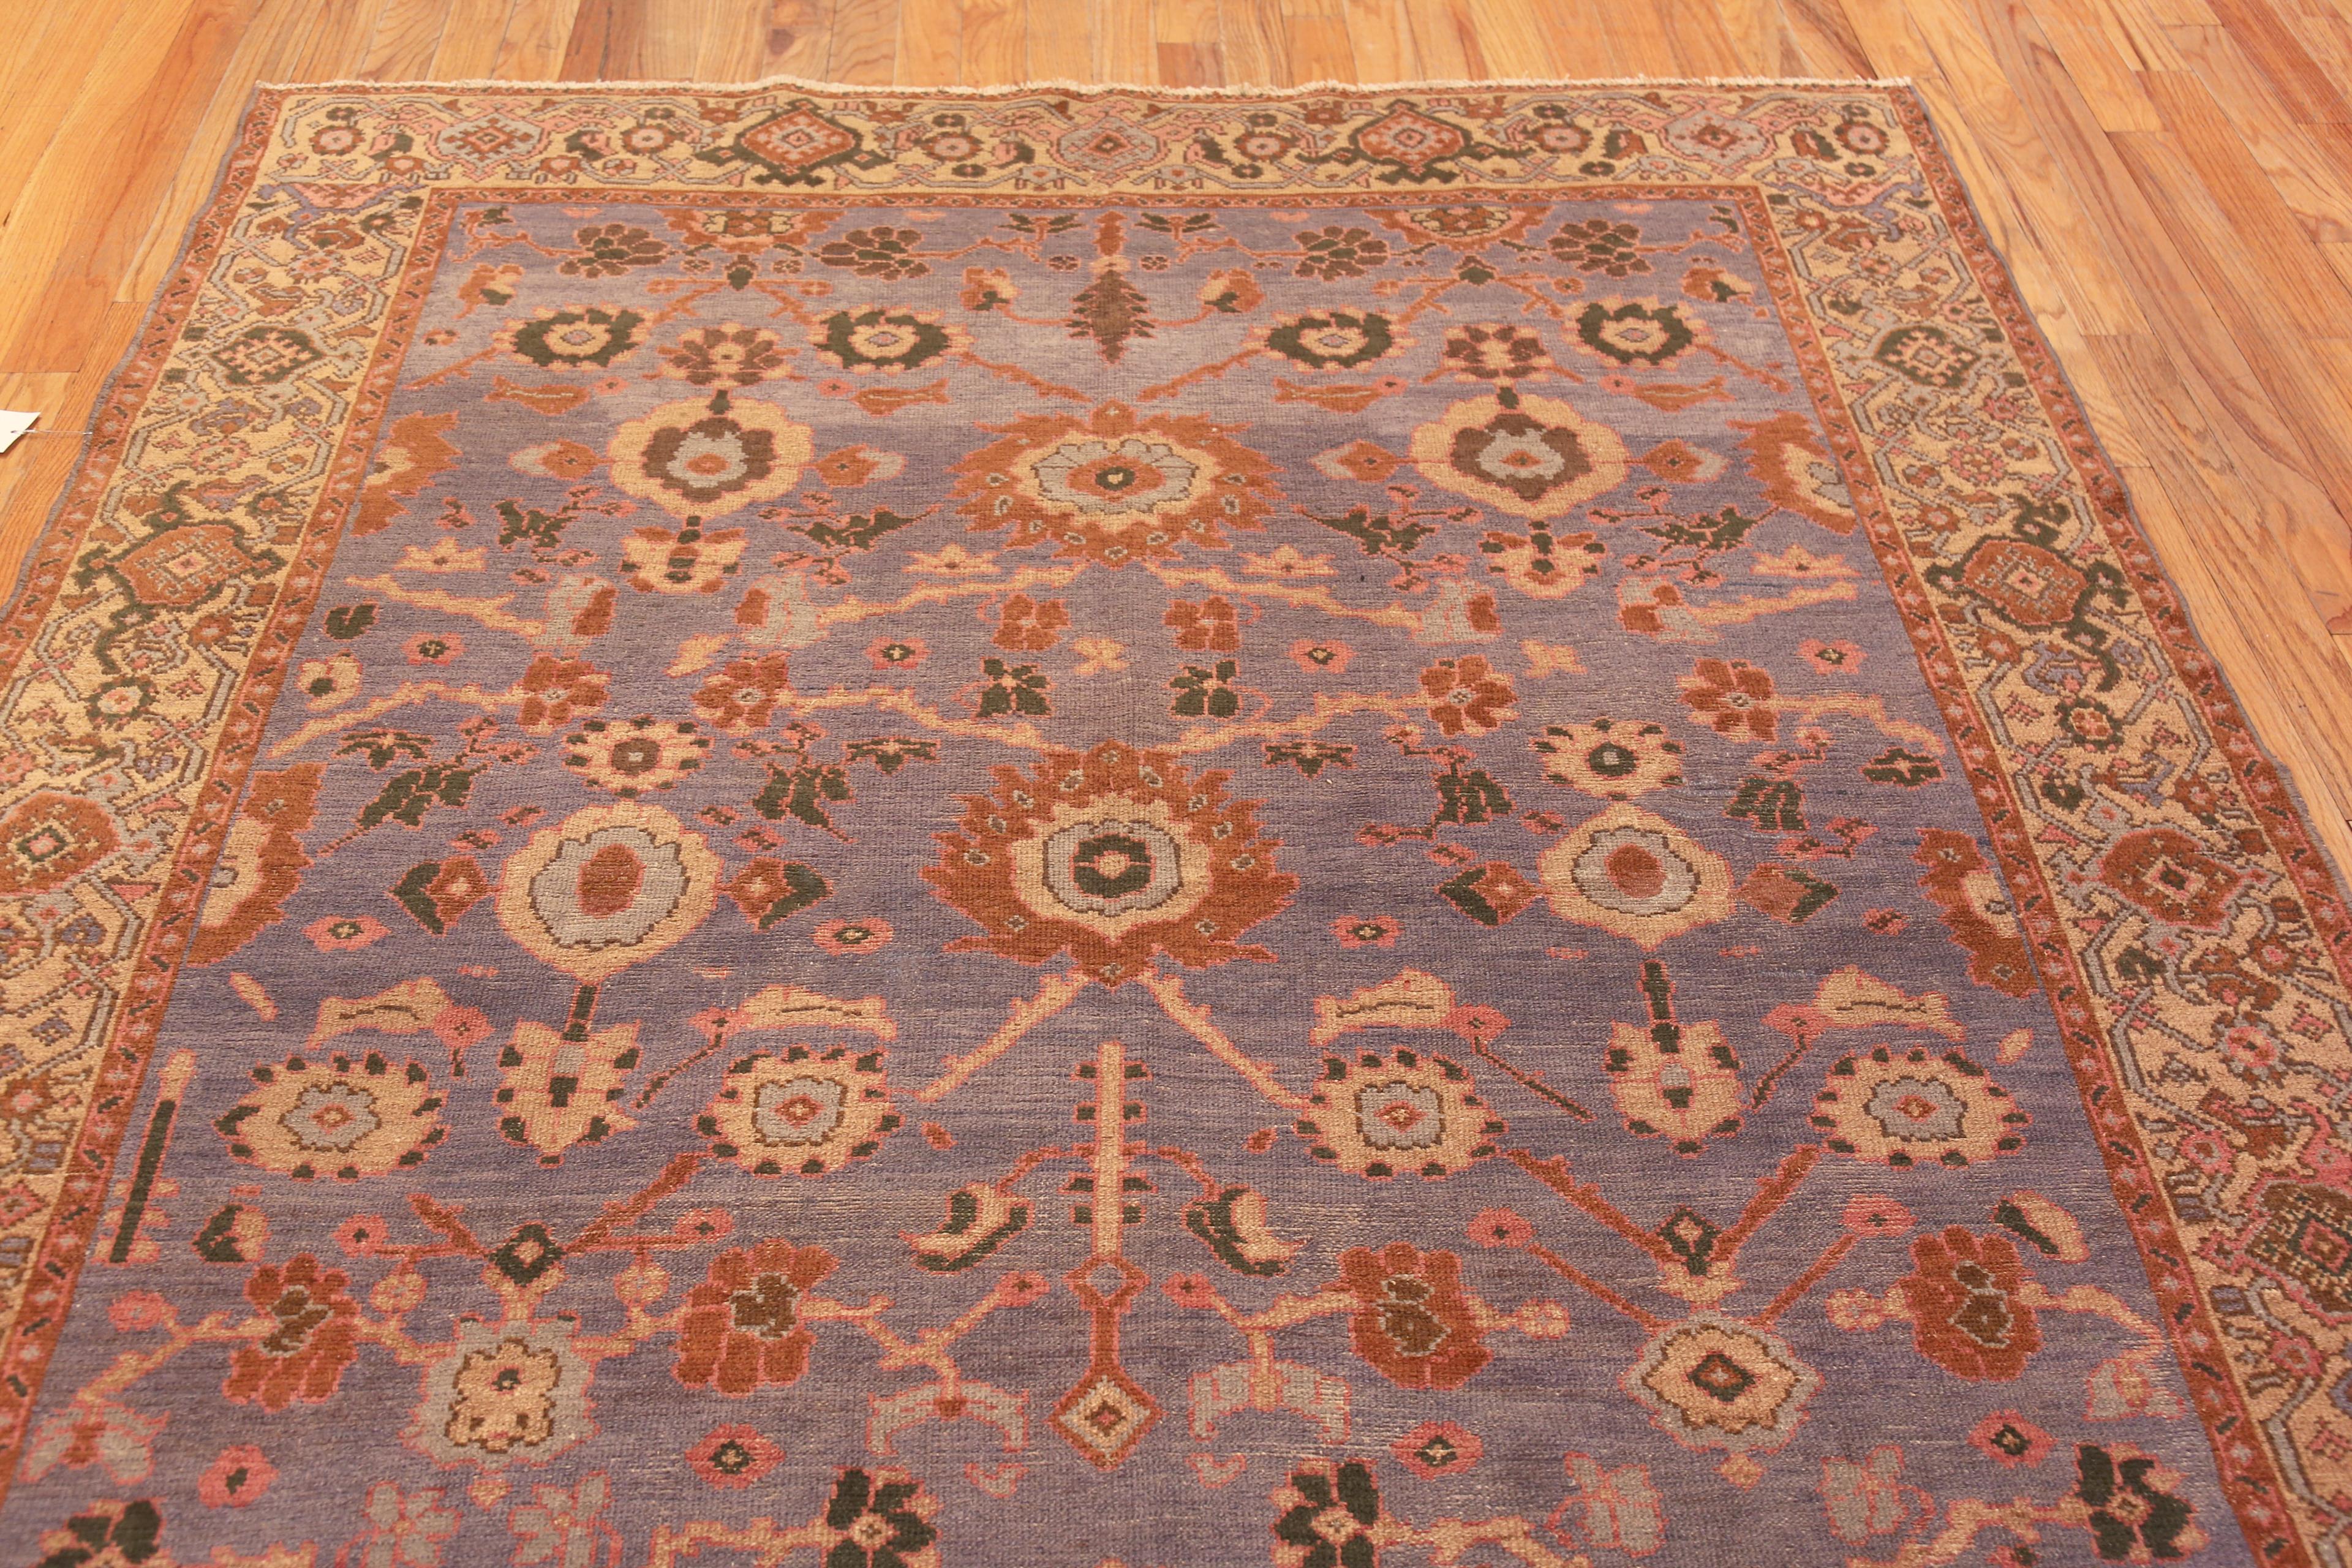 Hand-Knotted Amazing Tribal Allover Design Room Size Antique Persian Malayer Rug 7' x 9'5